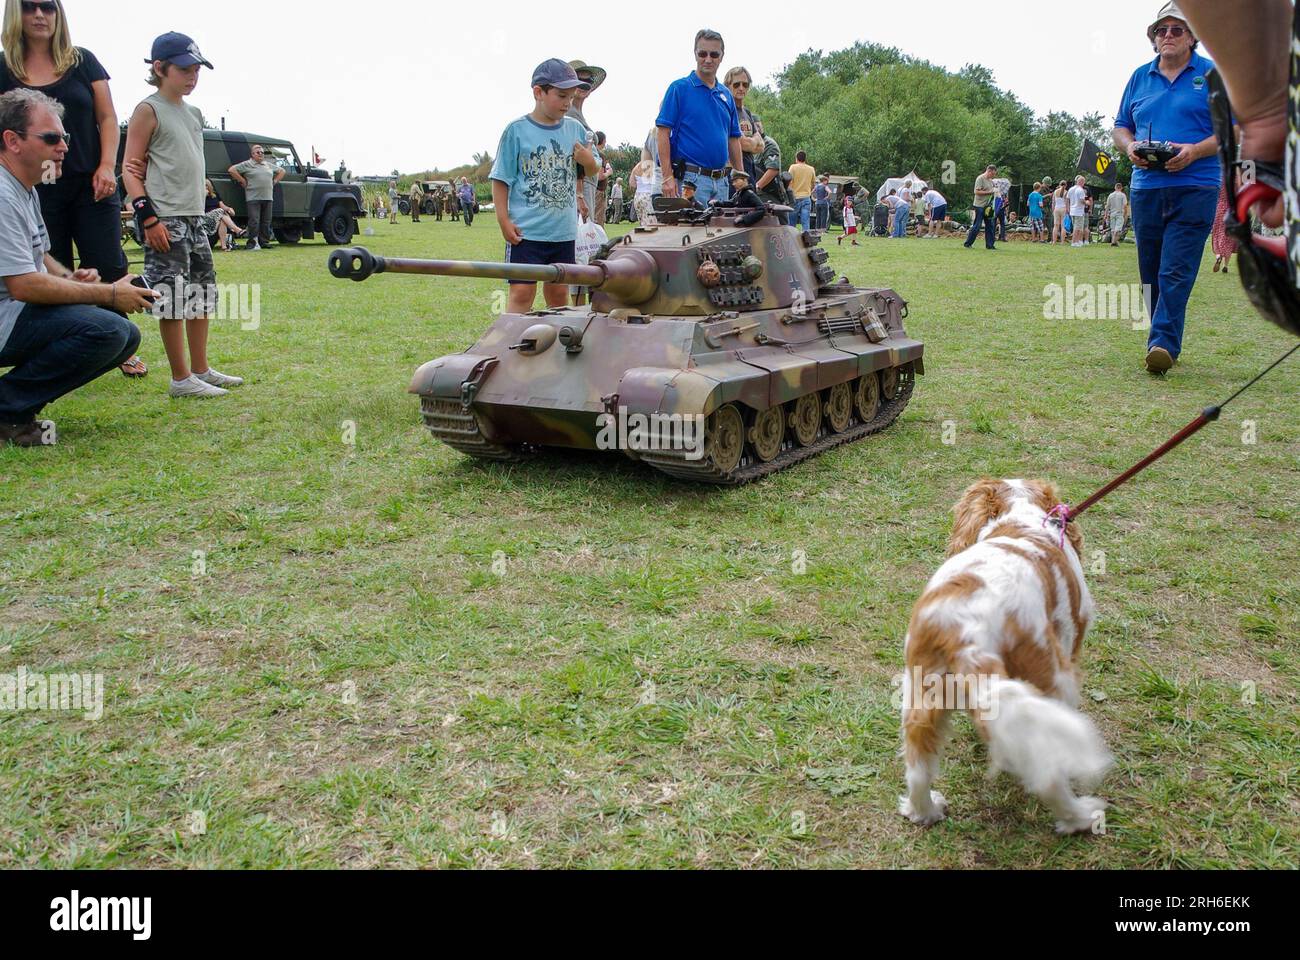 Very large scale radio controlled German Panther Army tank, of the Second World War at an outside military event, with a dog and children for scale Stock Photo